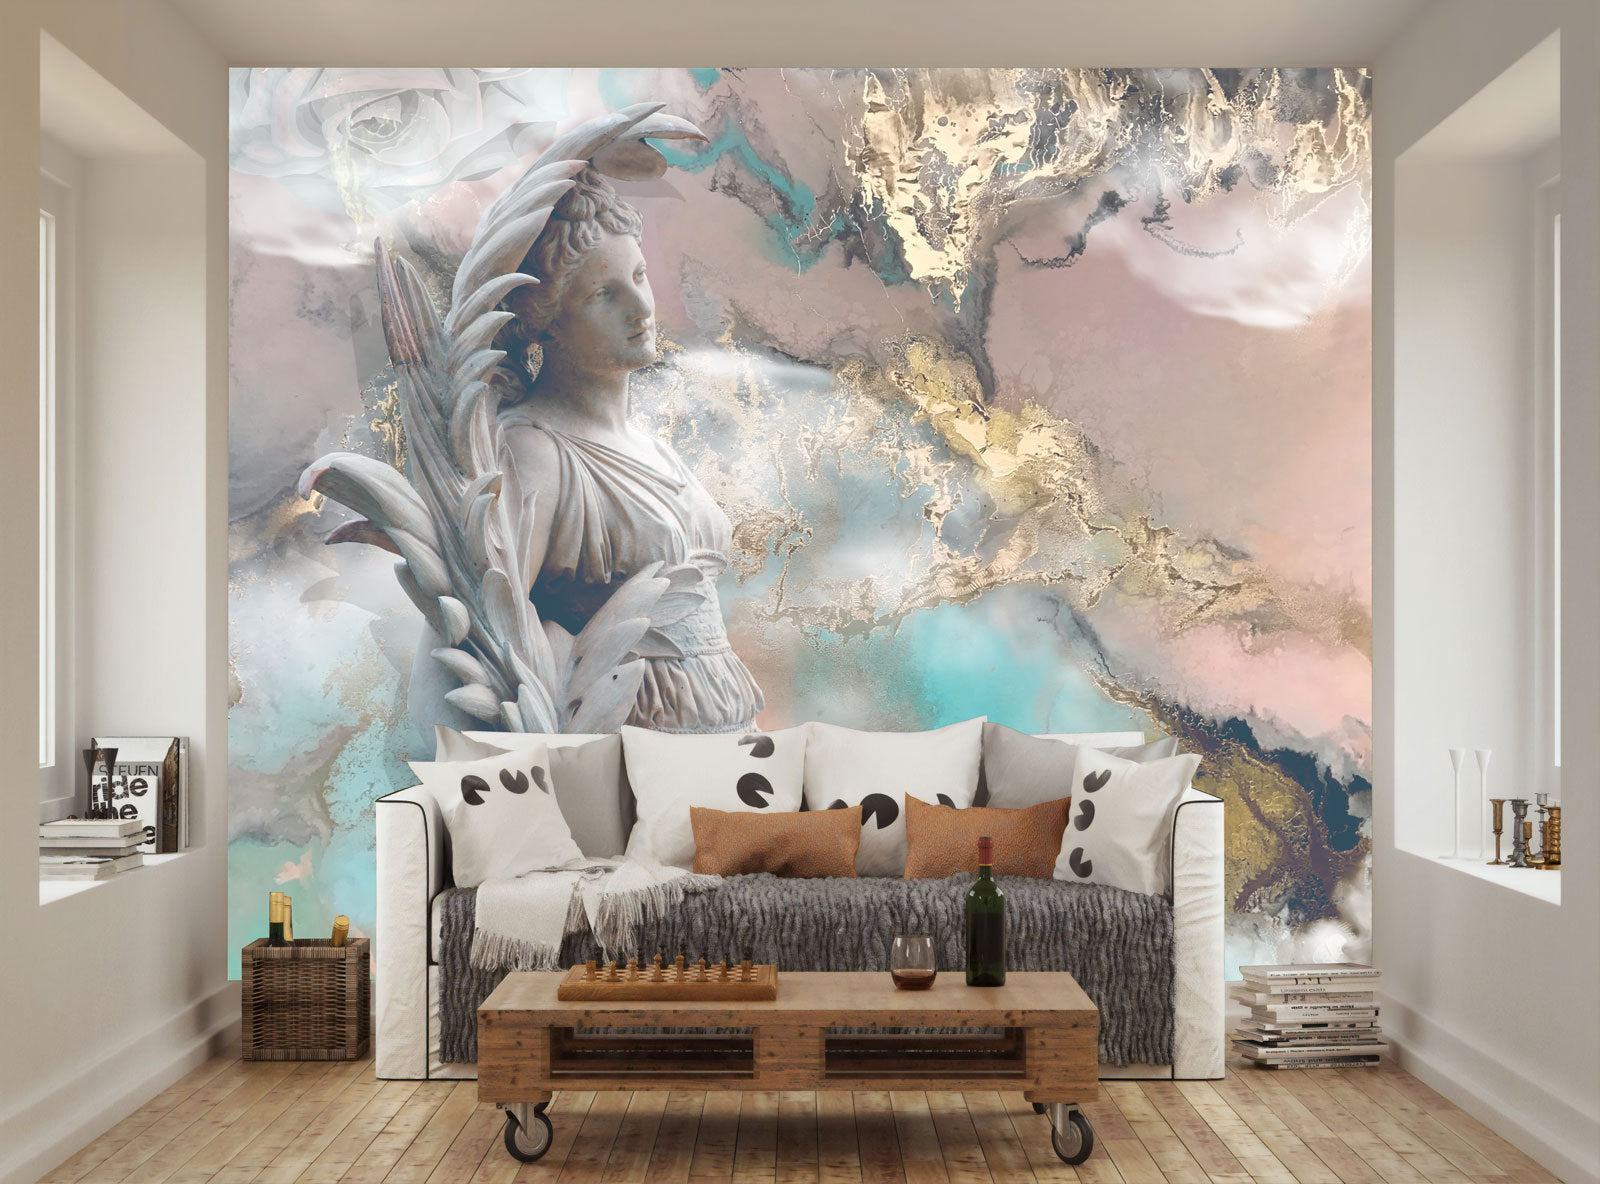 Ancient Mythology Goddes Abstract Art Wallpaper Self Adhesive Peel and Stick Wall Sticker Wall Decoration Removable